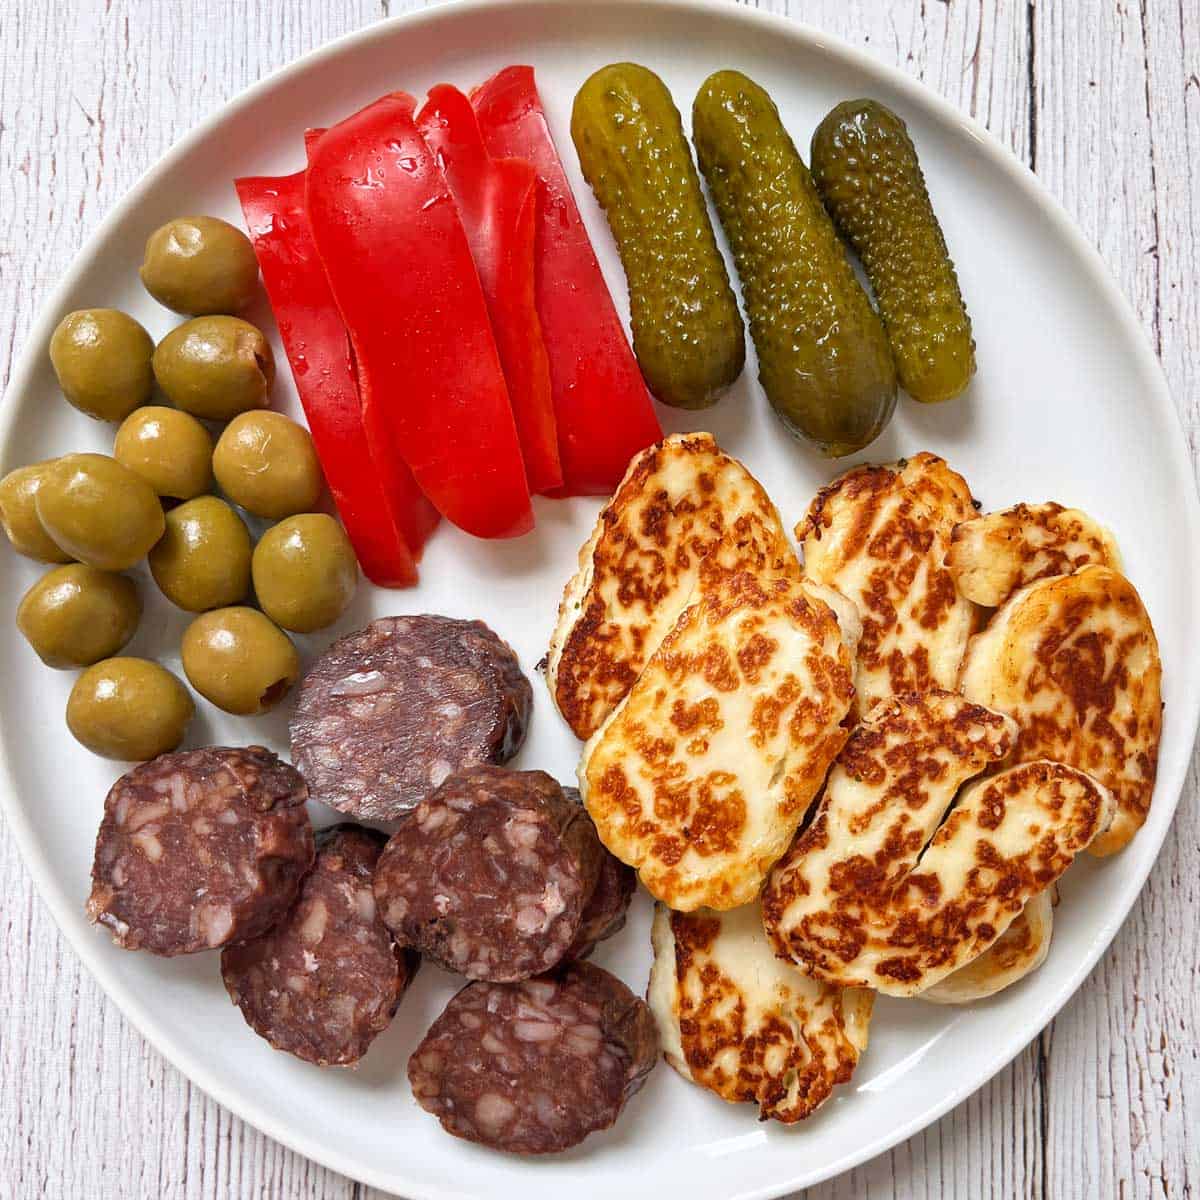 A snack plate with halloumi cheese, salami, peppers, and pickles.